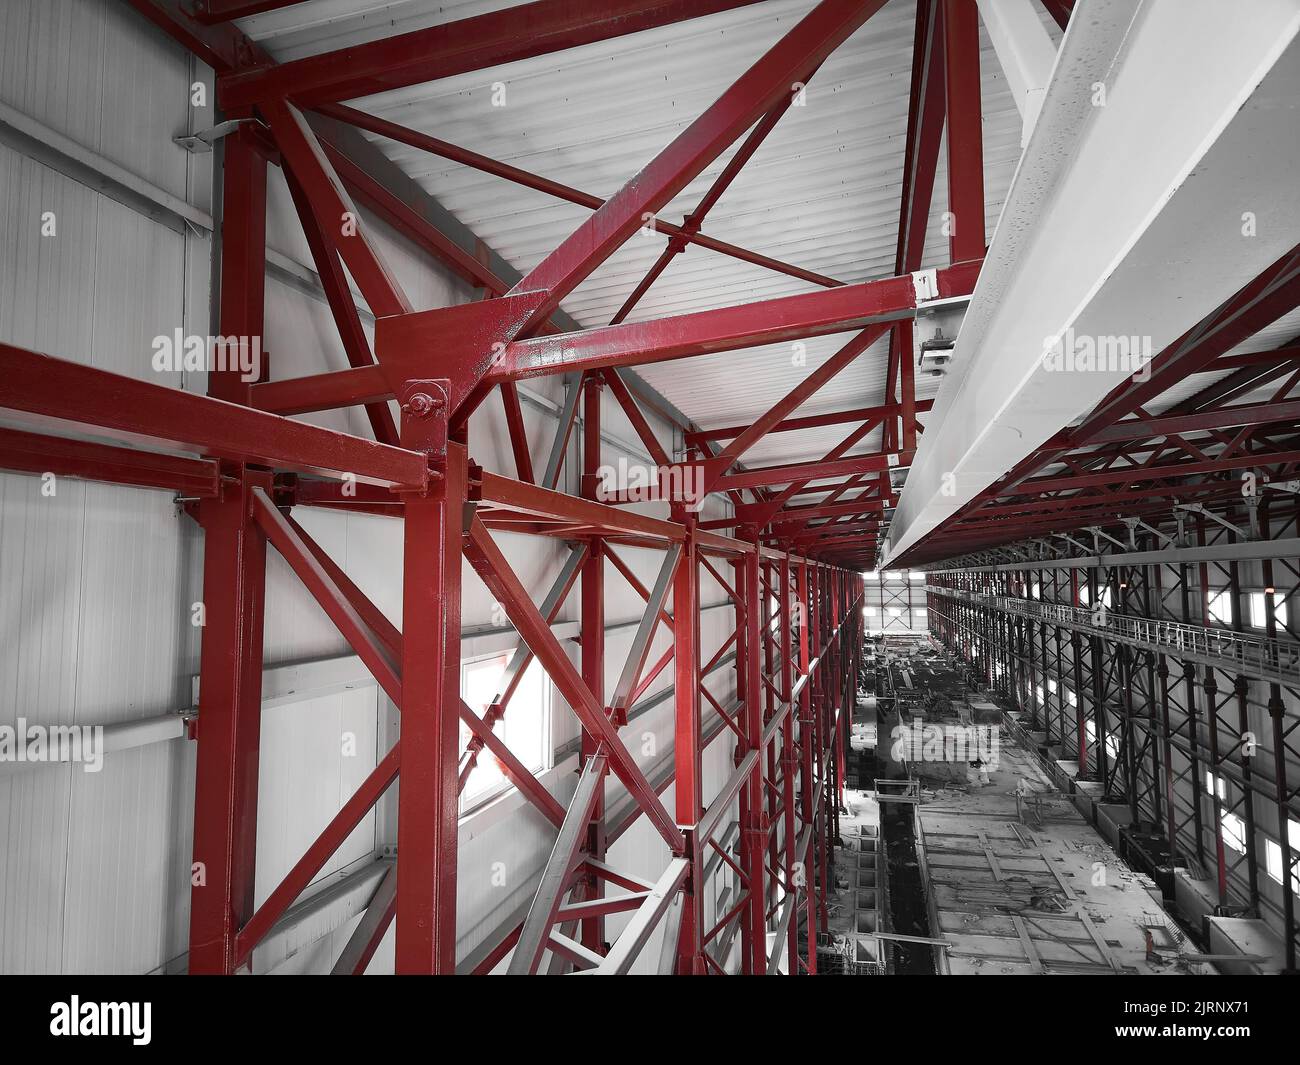 Metal framework structures of industrial building Stock Photo